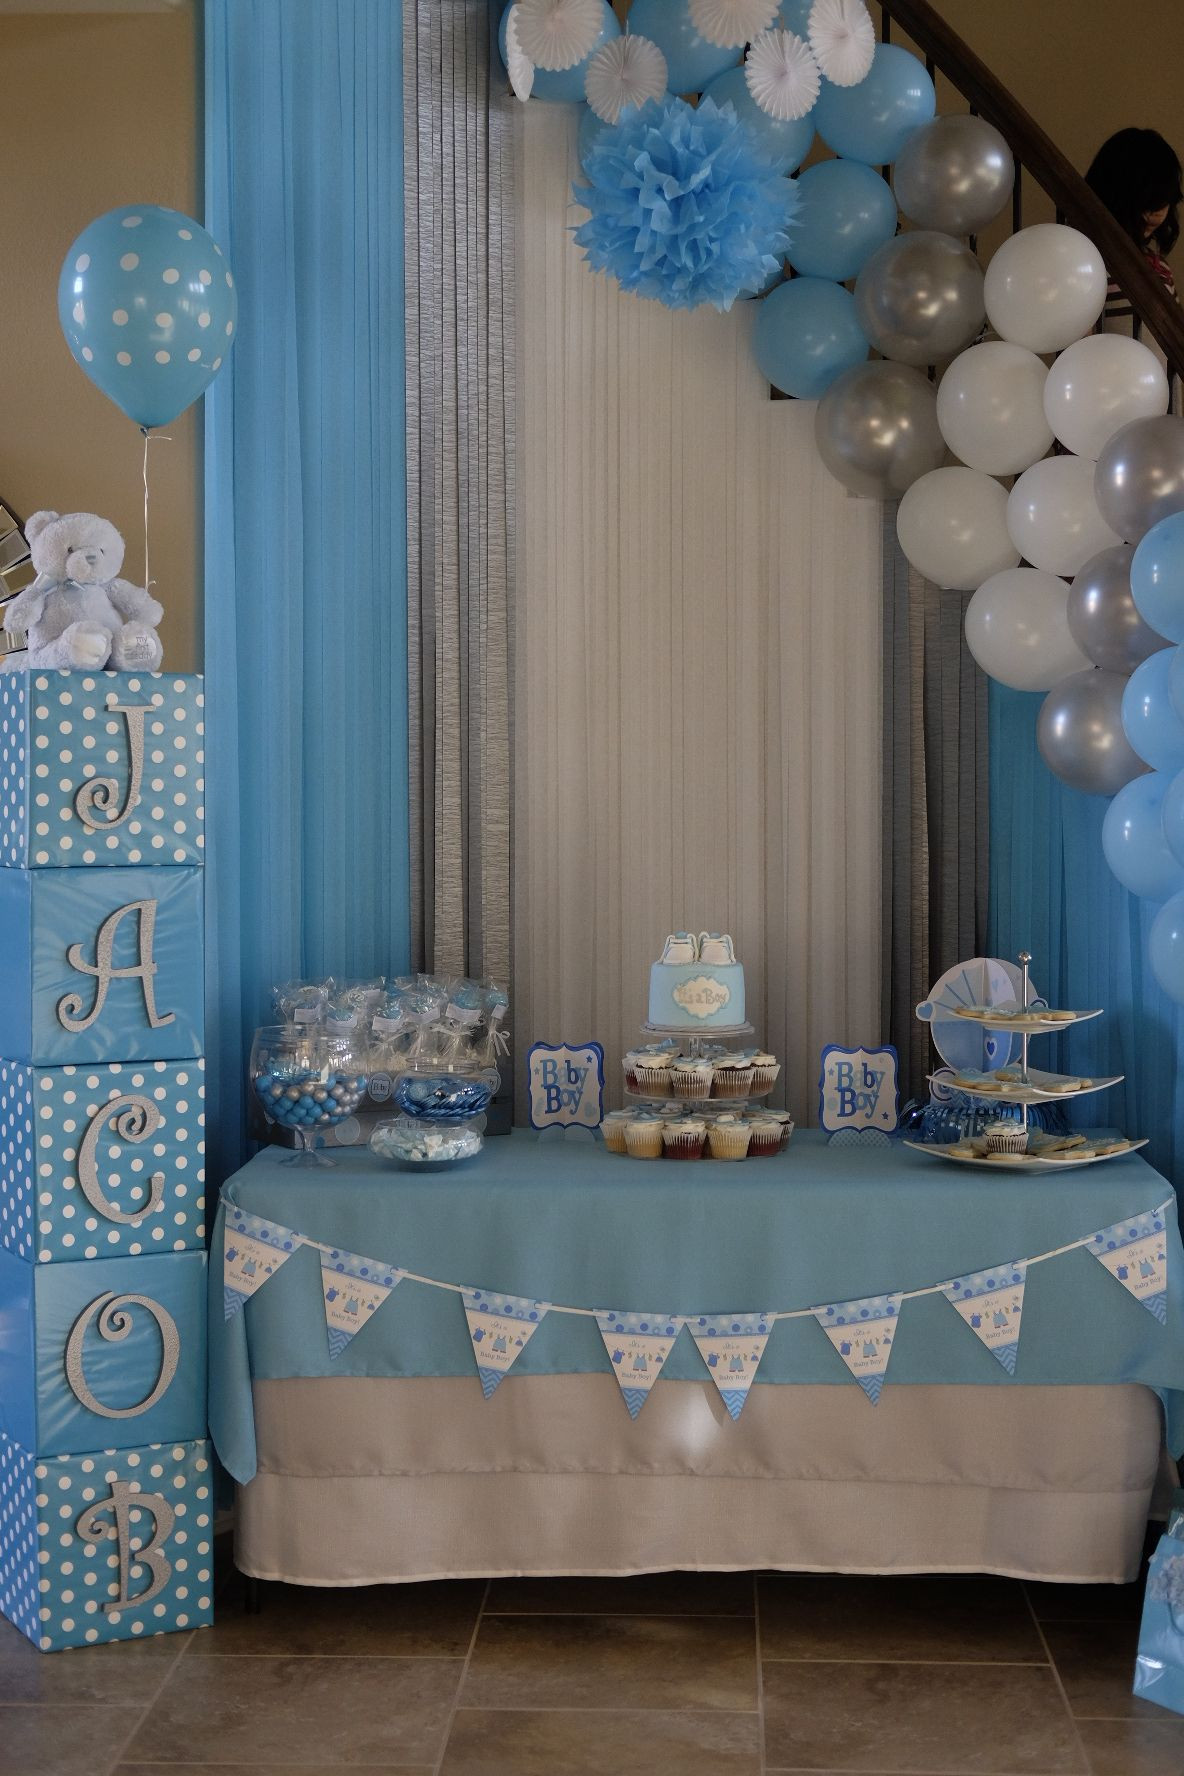 Baby Boy Shower Decorations Ideas
 Pin by Jennelyn Escoto on BABY JACOB SHOWER in 2019